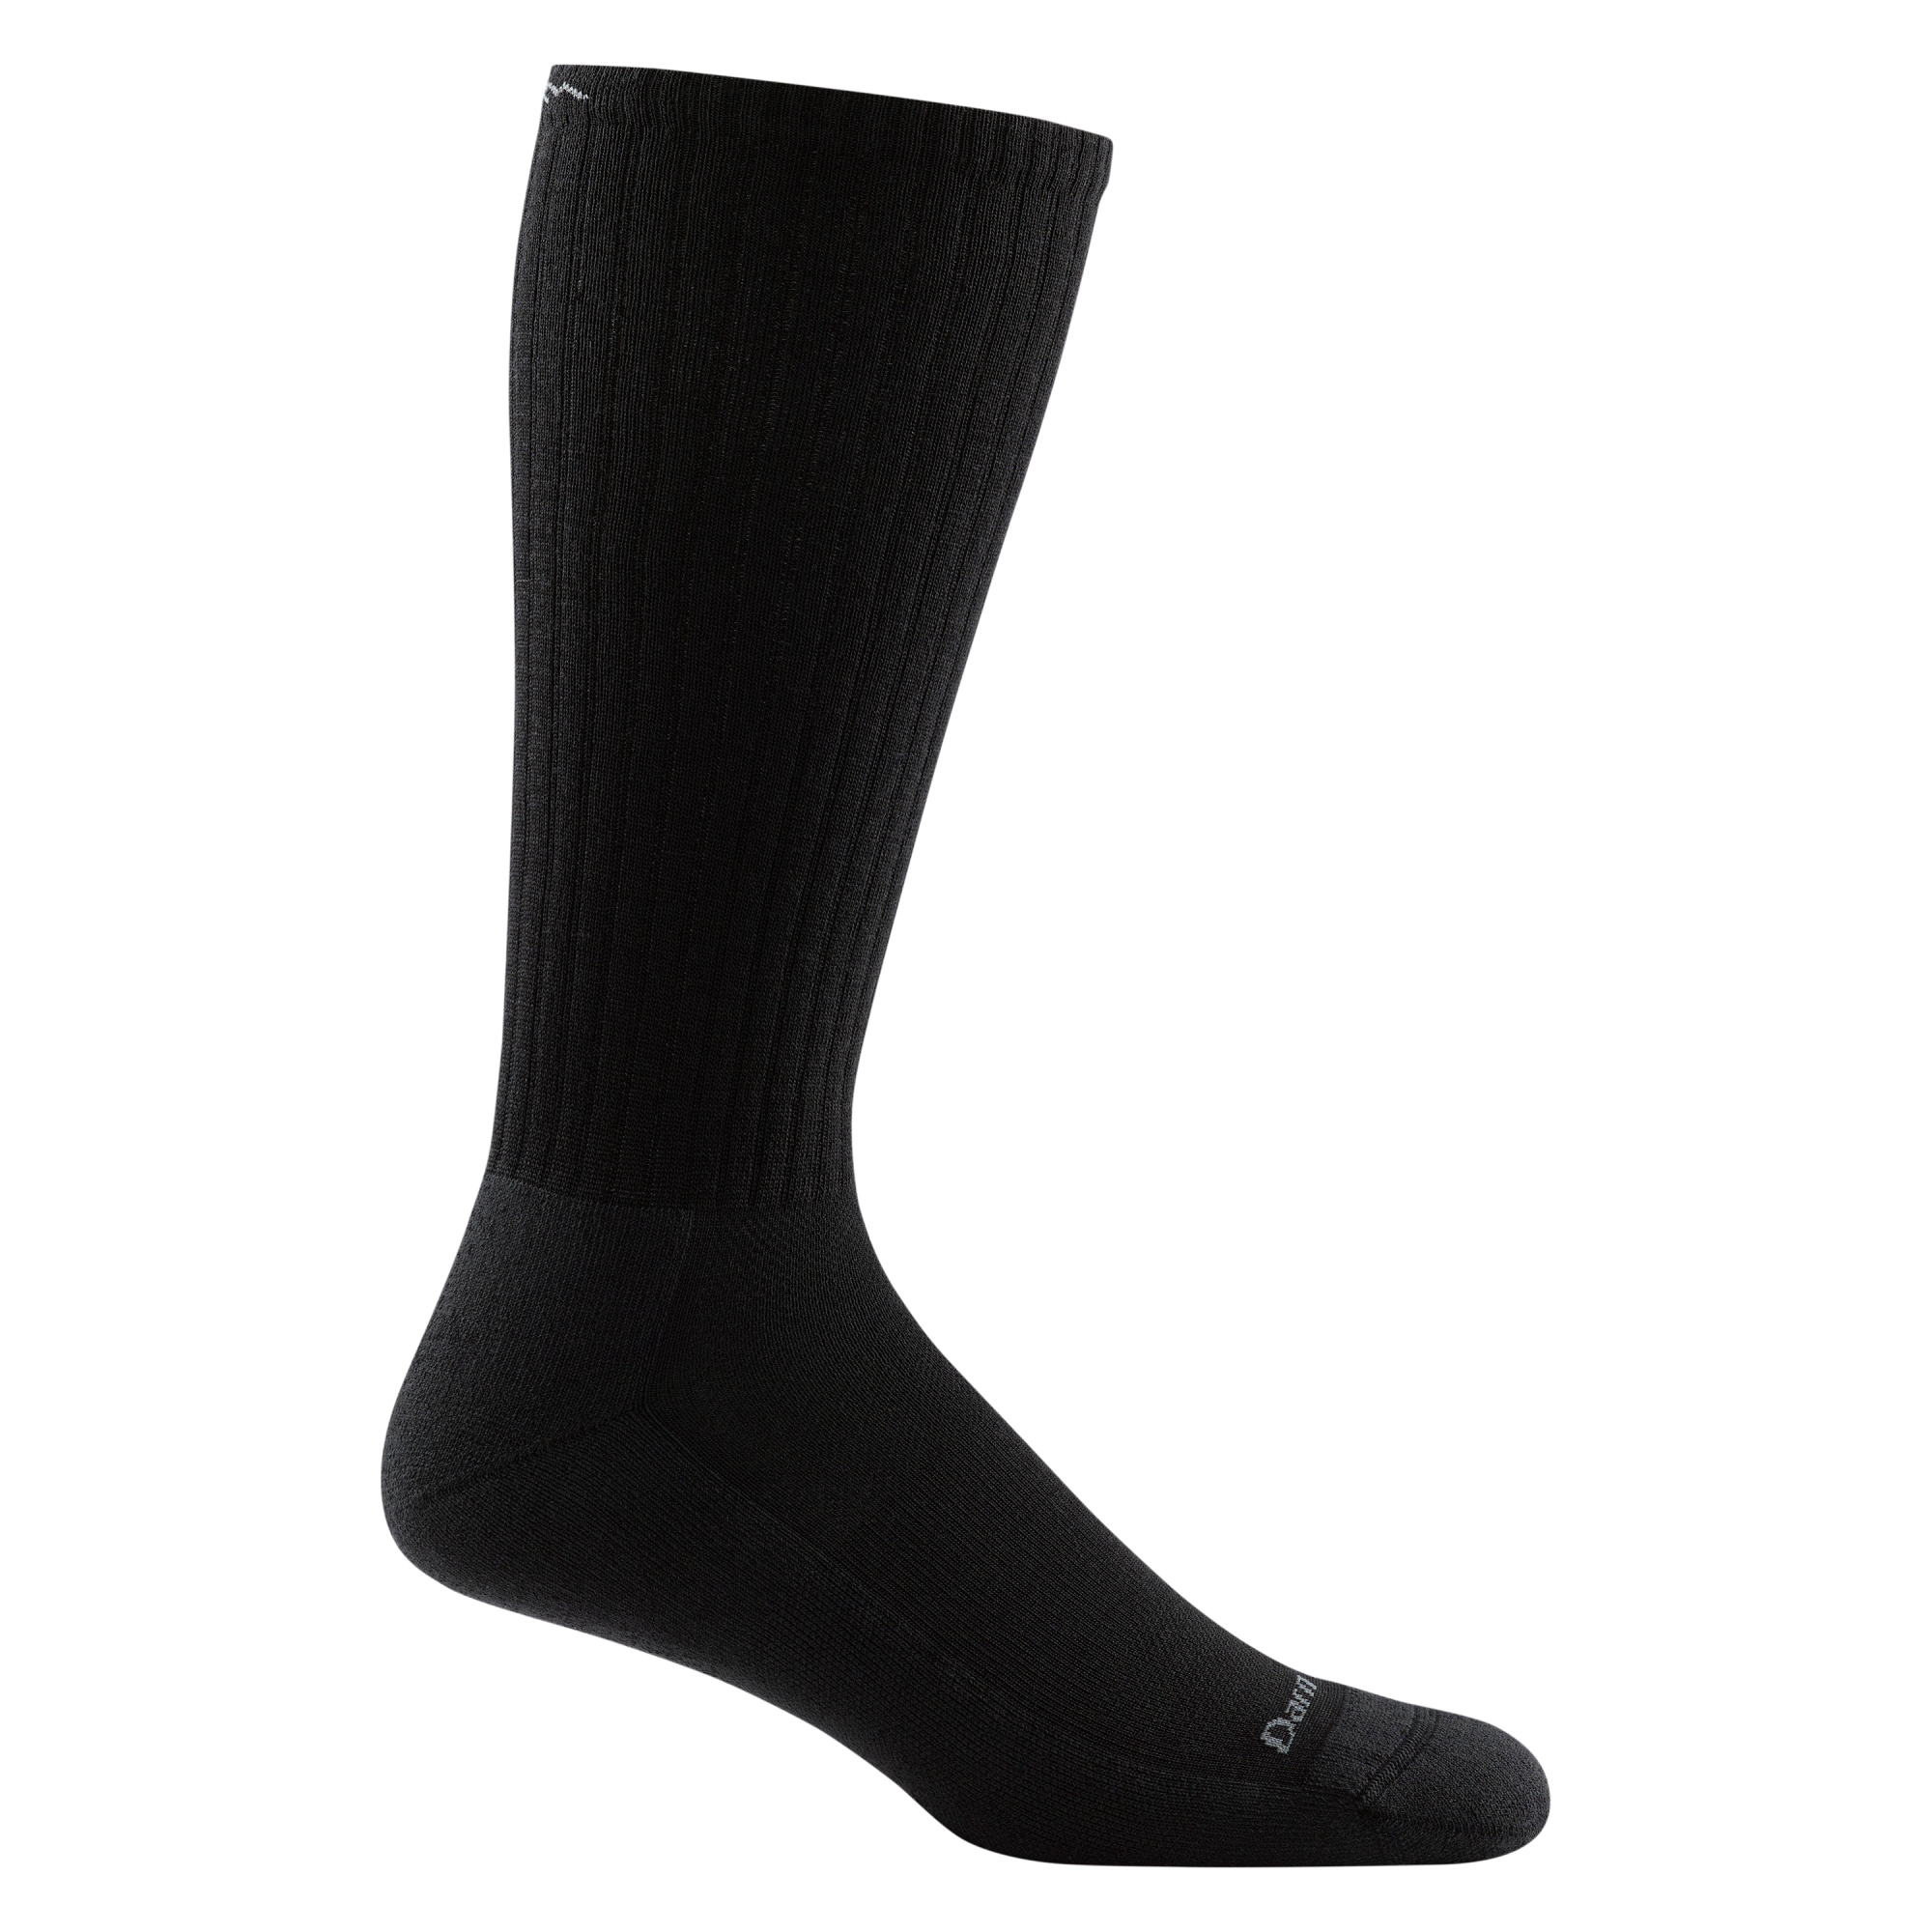 1480 men's the standard mid-calf lifestyle sock in color black with white darn tough signature on forefoot